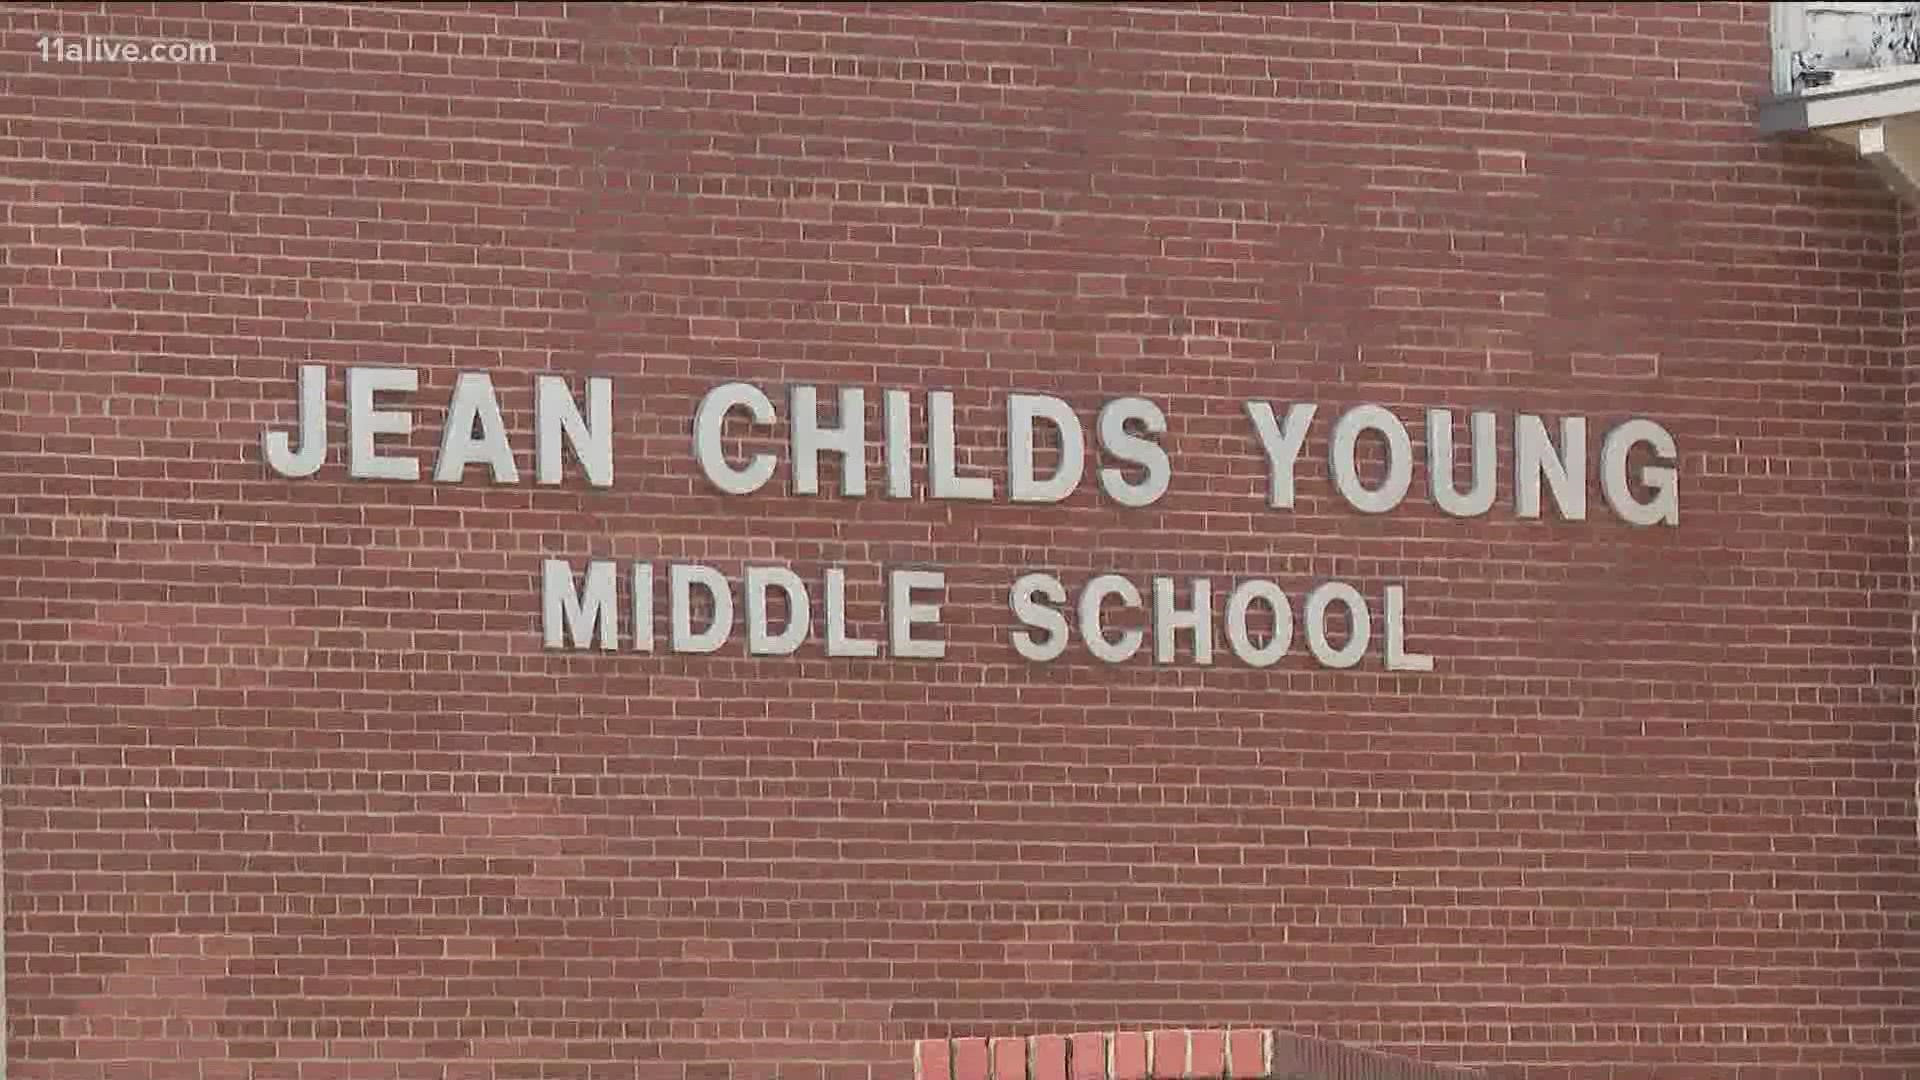 Students and staff are safe after being evacuated at Jean Childs Young Middle School in southwest Atlanta following a bomb threat Wednesday morning.